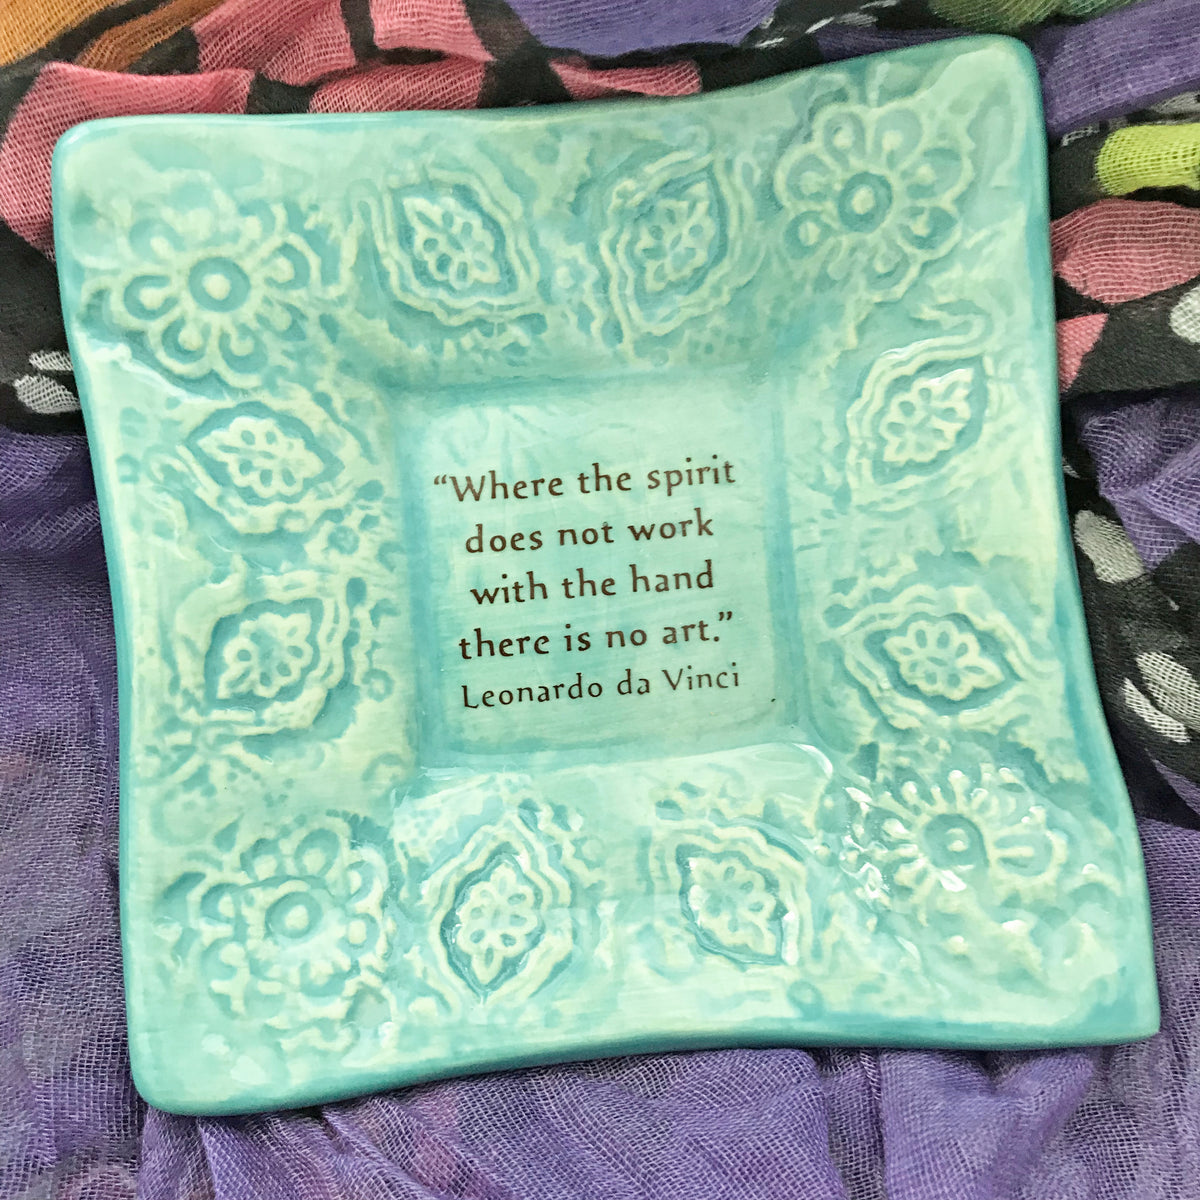 &quot;Where the spirit does not work with the hand there is not art.&quot;  Quote by da Vinci on Oerth Studio&#39;s handmade pottery dipping dish. 